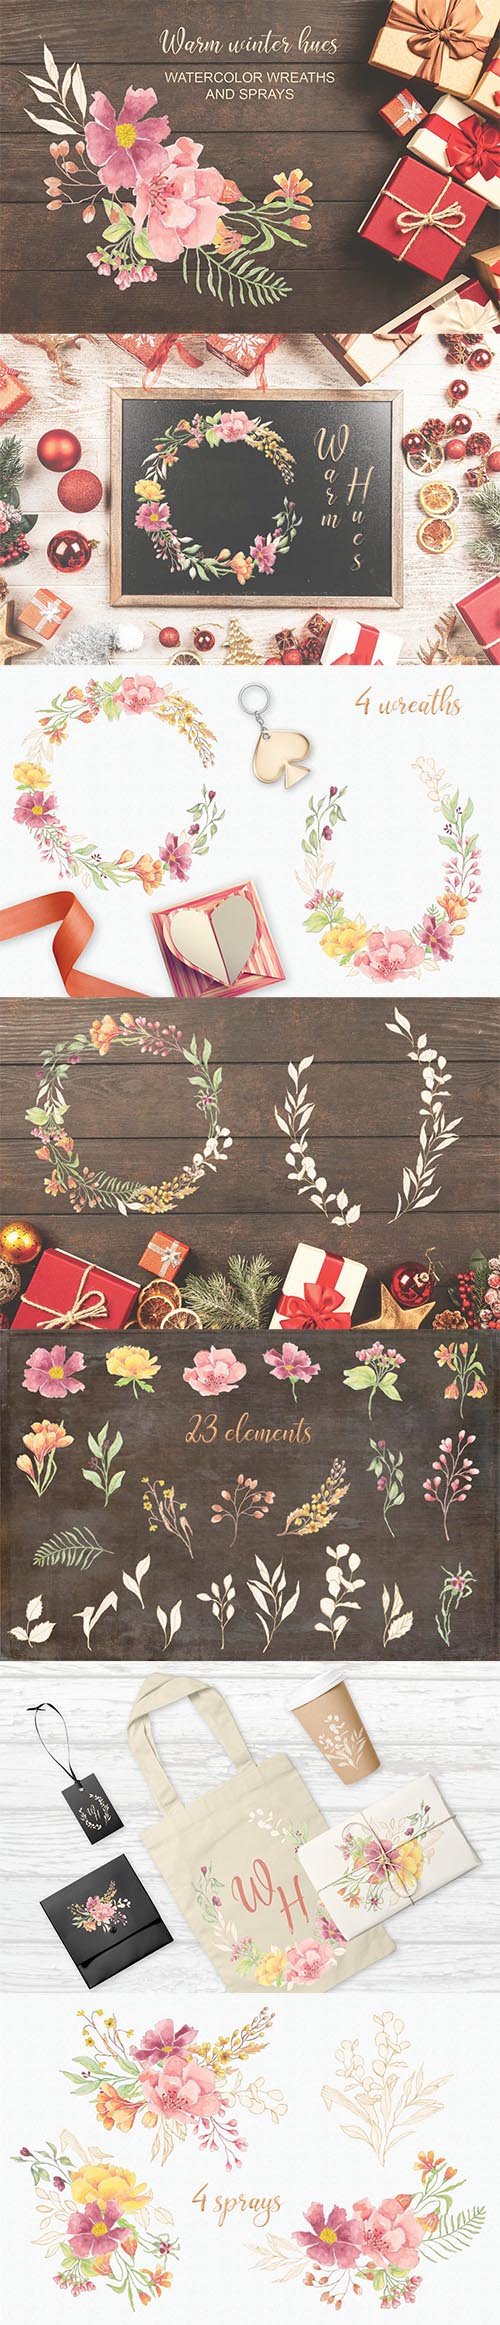 Warm Winter Hues: Watercolor Wreaths and Sprays